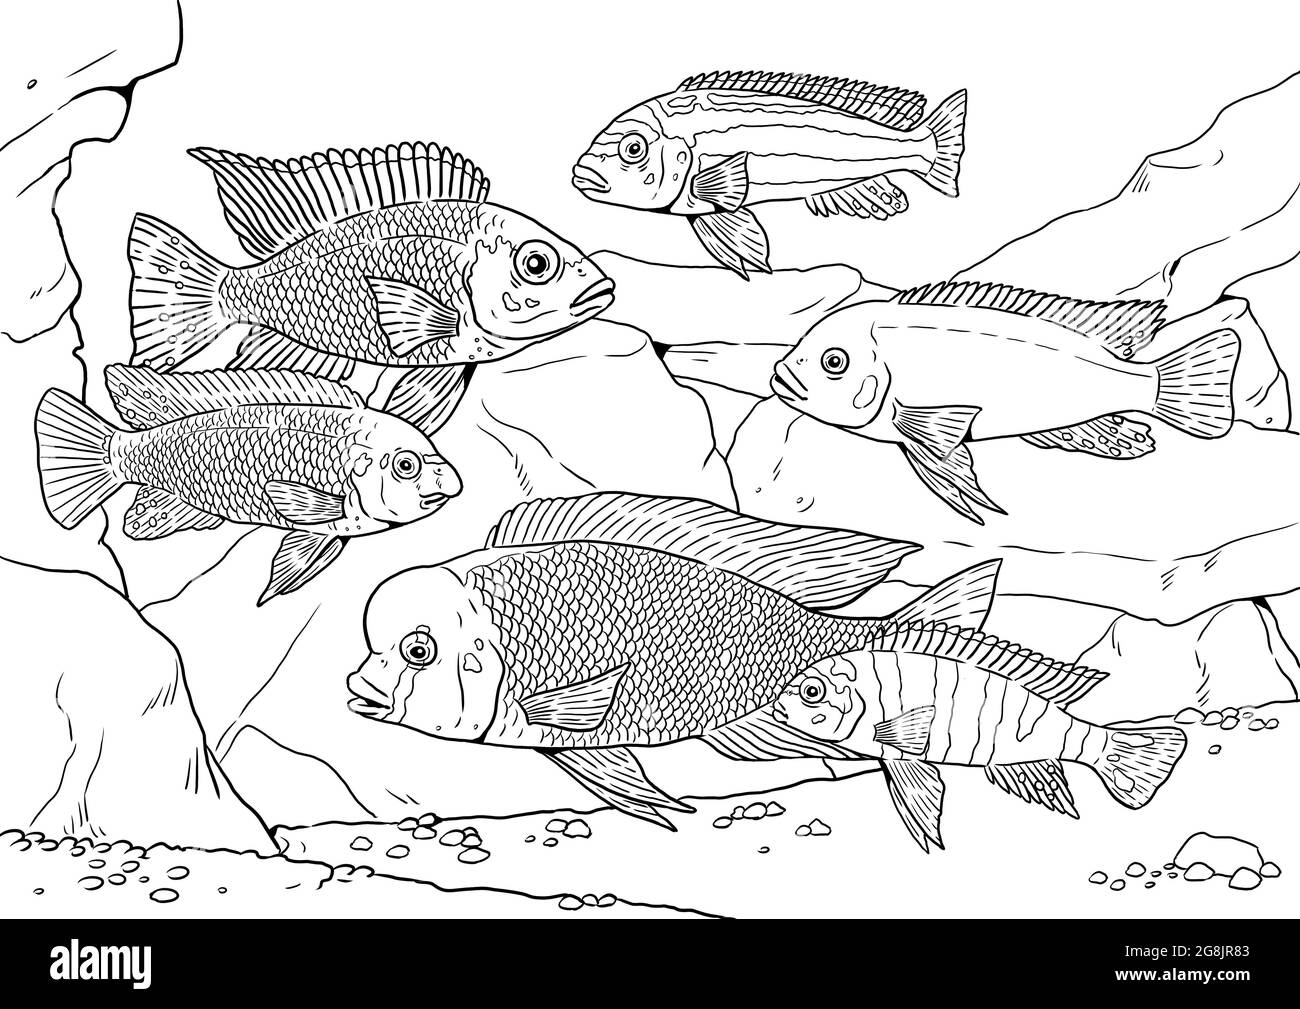 Aquarium with cichlids from the Malawi lake for coloring. Colorful african fish template. Coloring book for children and adults. Stock Photo